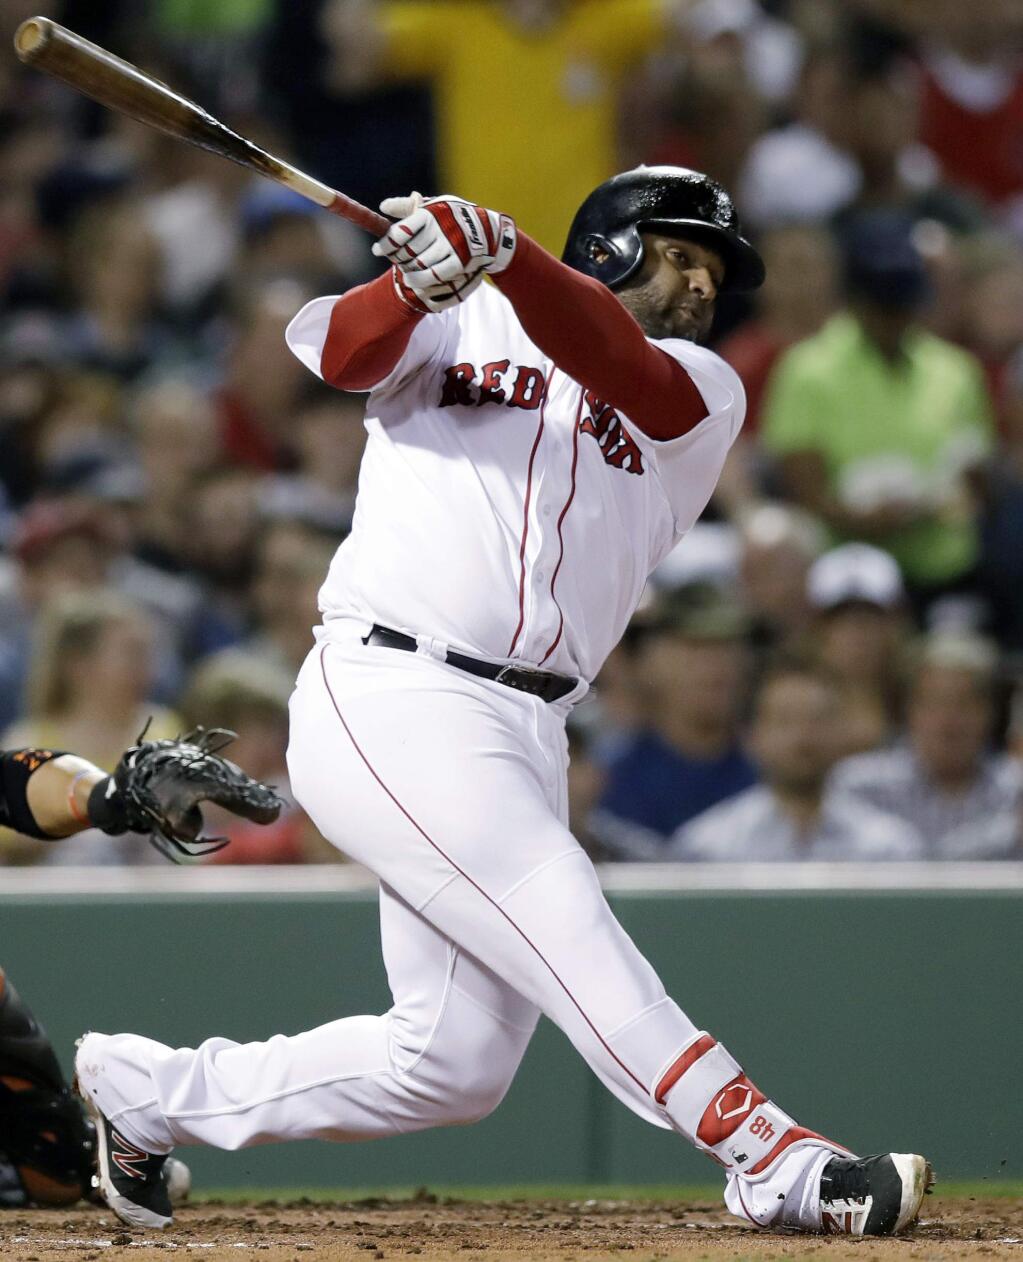 FILE - In this April 11, 2017, file photo, Boston Red Sox's Pablo Sandoval swings during the second inning of a baseball game against the Baltimore Orioles at Fenway Park in Boston. On Friday, July 14, 2017, the Red Sox announced that Sandoval had been designated for assignment after being activated from the 10-day disabled list. (AP Photo/Charles Krupa, File)